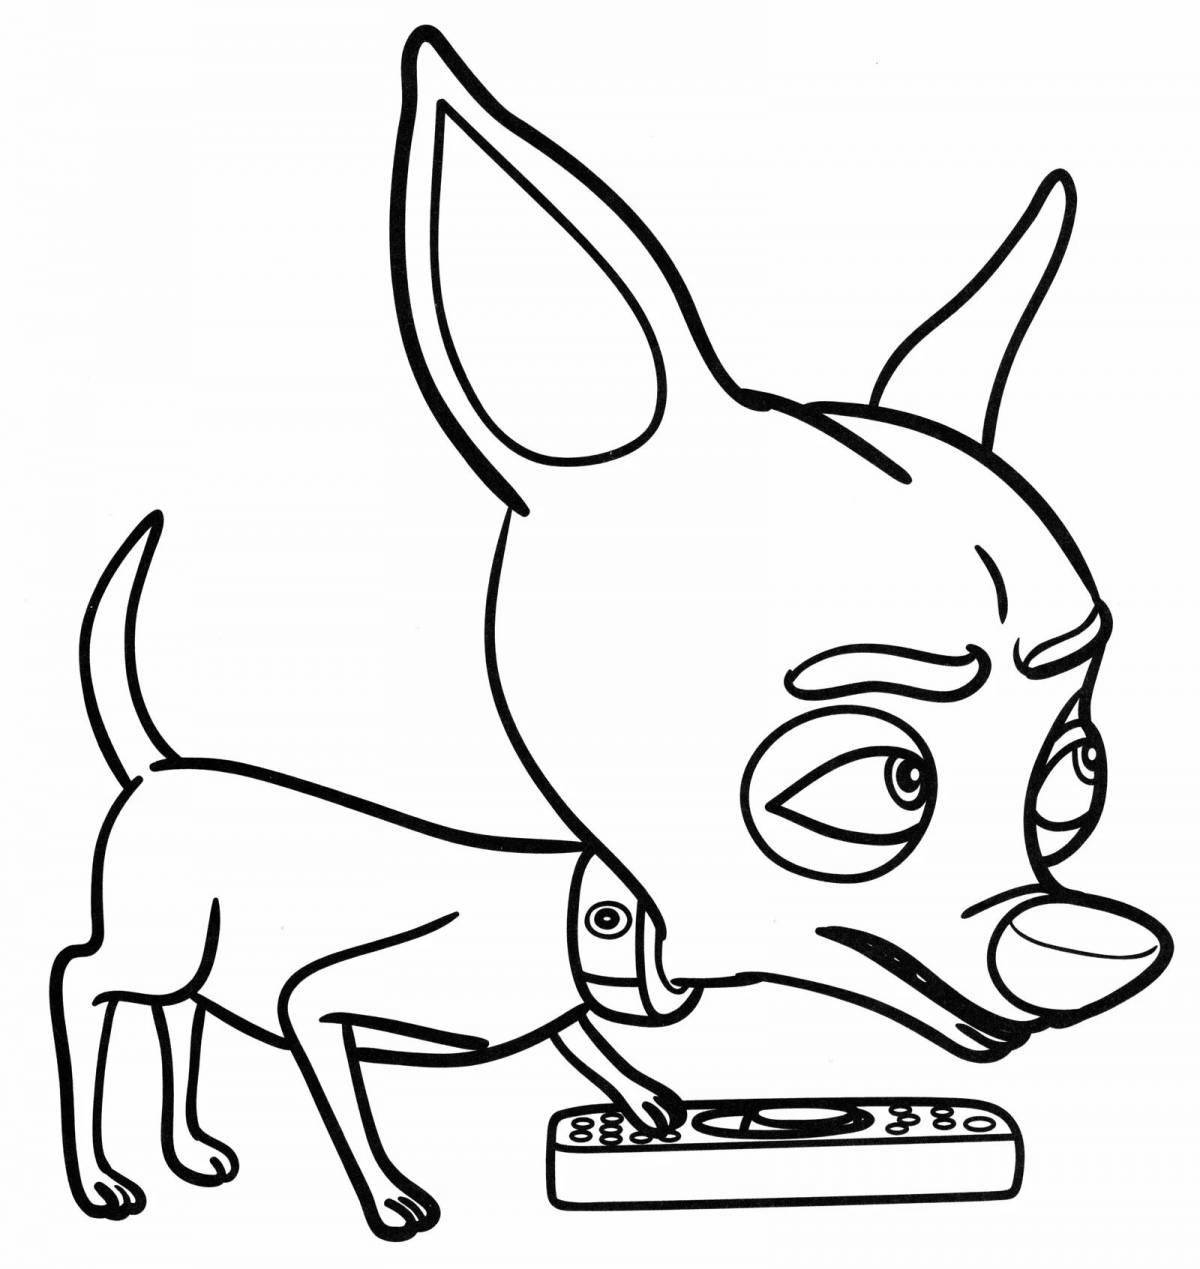 Regal wire cutter coloring page